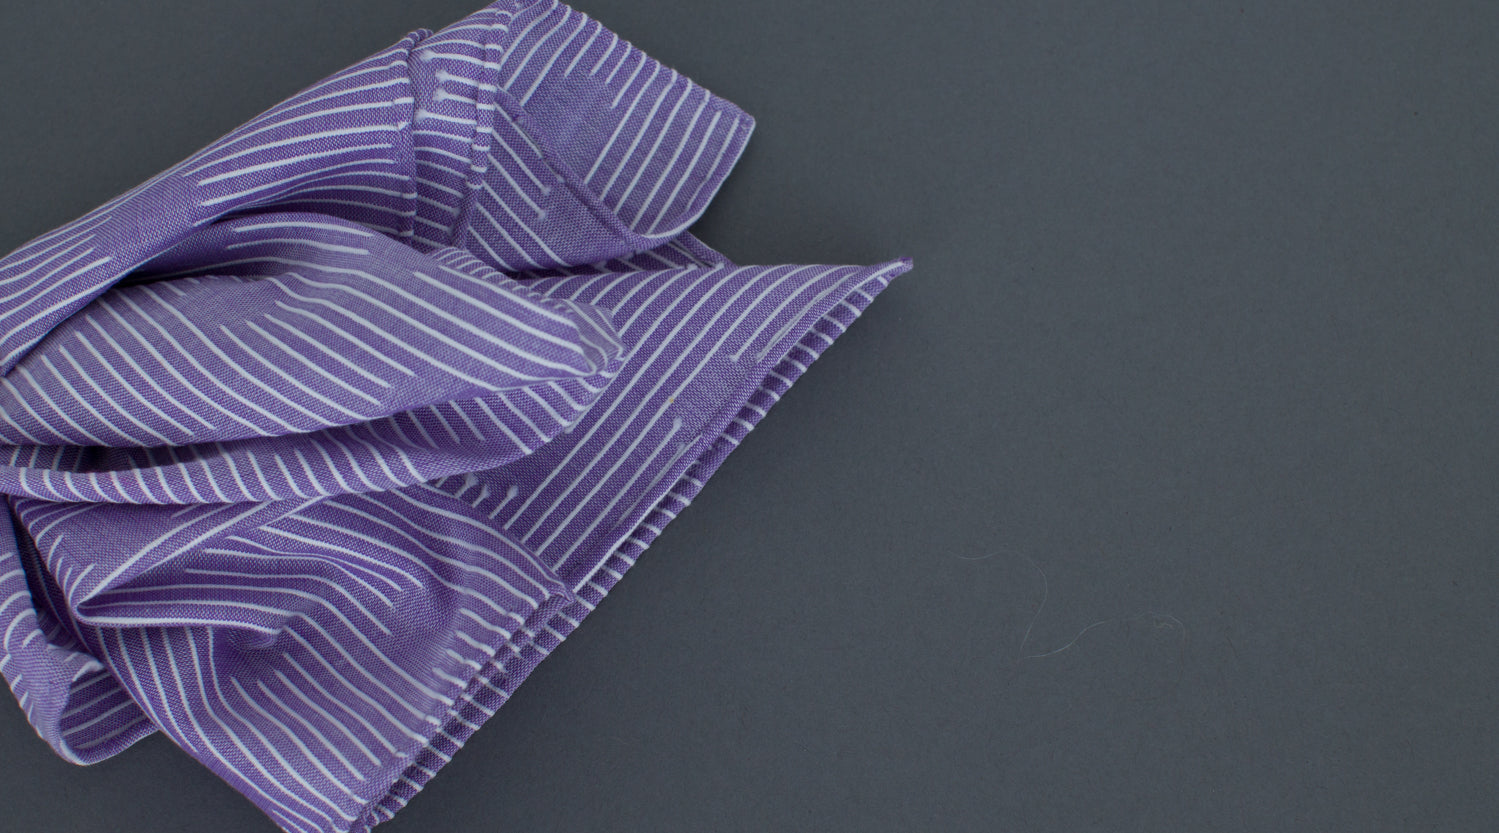 High quality Simonnot Godard Violet Les Pois Fils Coupe Cotton Pocket Square in purple and white stripes, on a grey background, available at KirbyAllison.com.